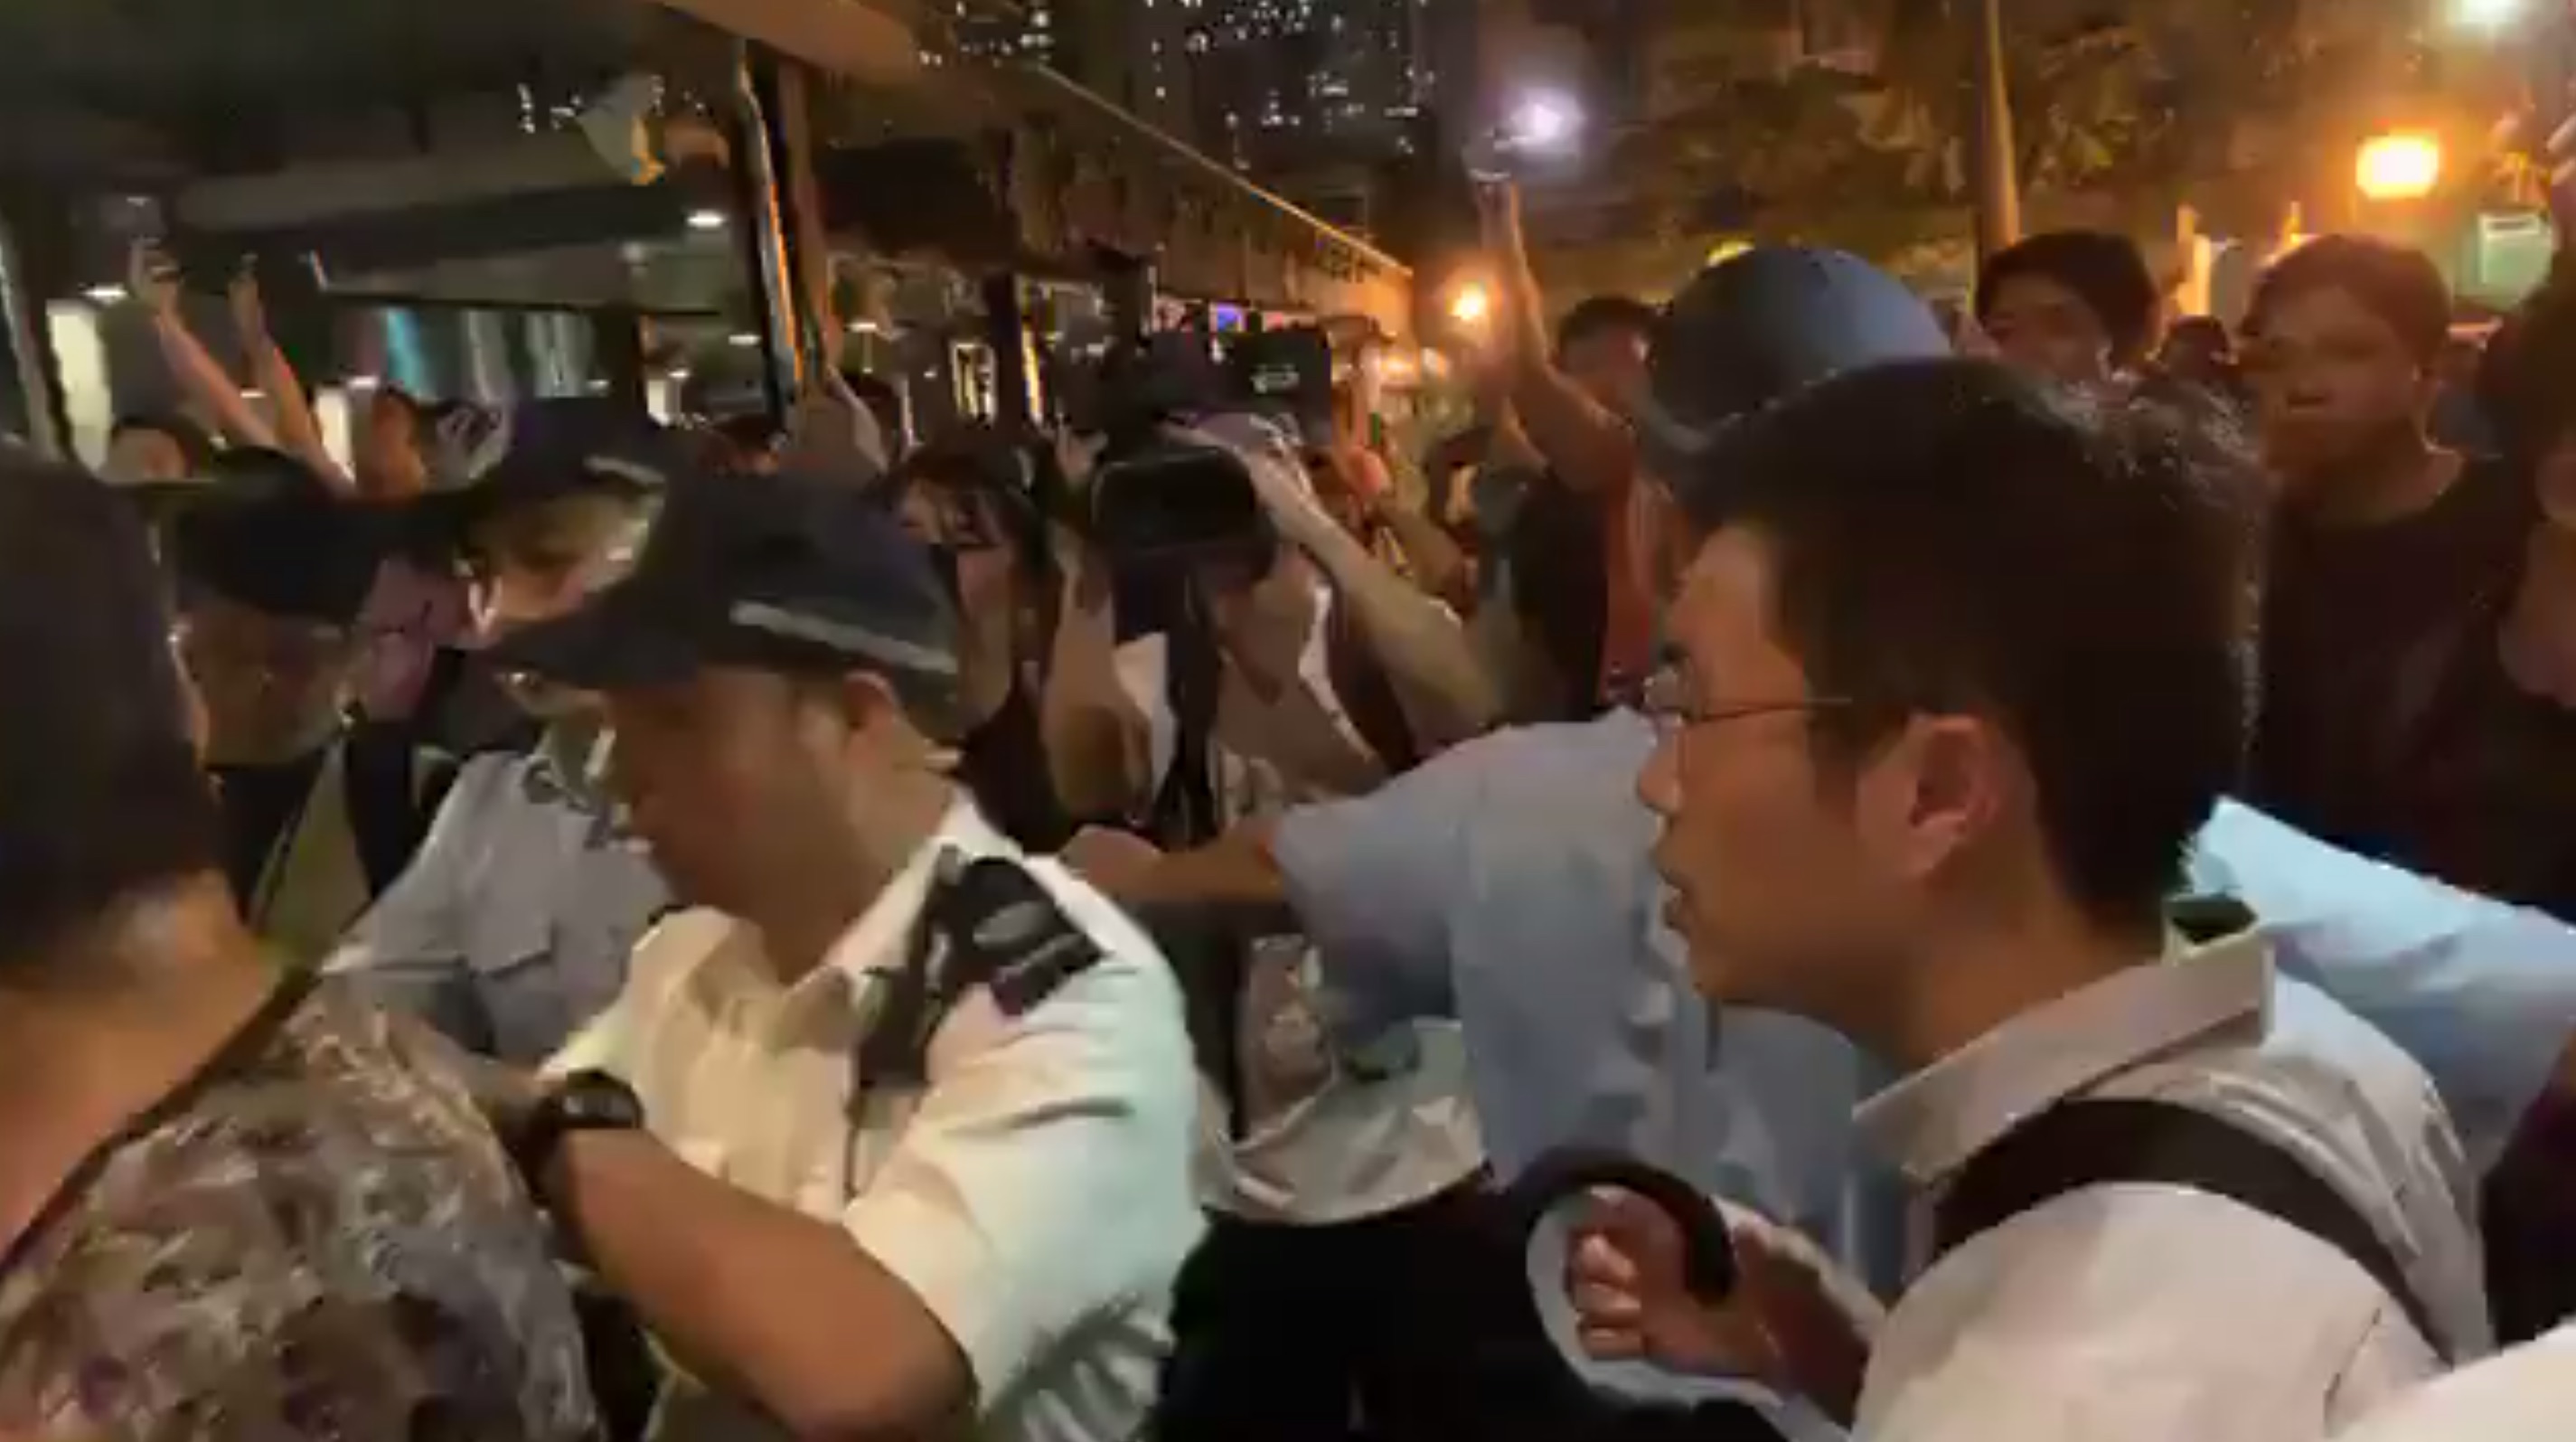 Police attempt to calm a crowd of both supporters and opponents of the city’s ongoing protest movement at a “Lennon Wall” in Yau Tong on July 10. Screengrab via Facebook.